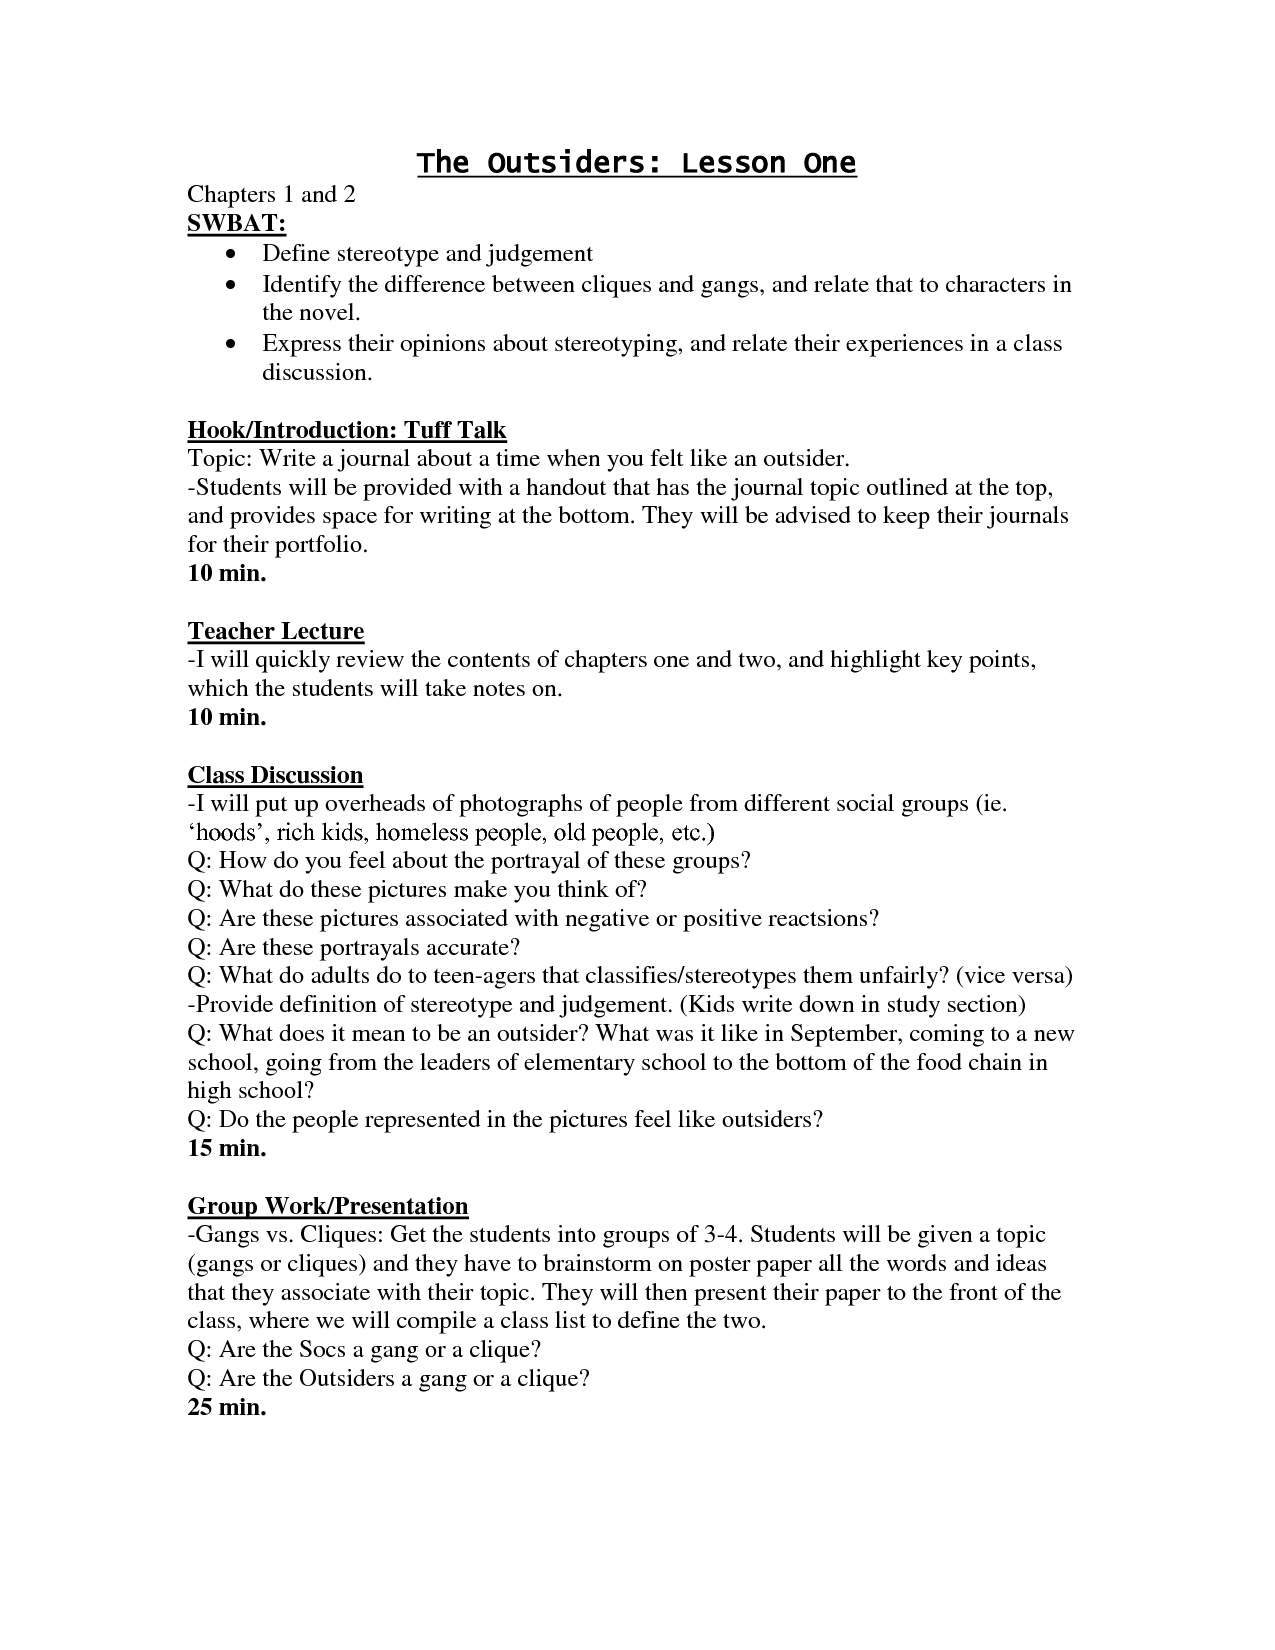 The Outsiders Activities Worksheets Image